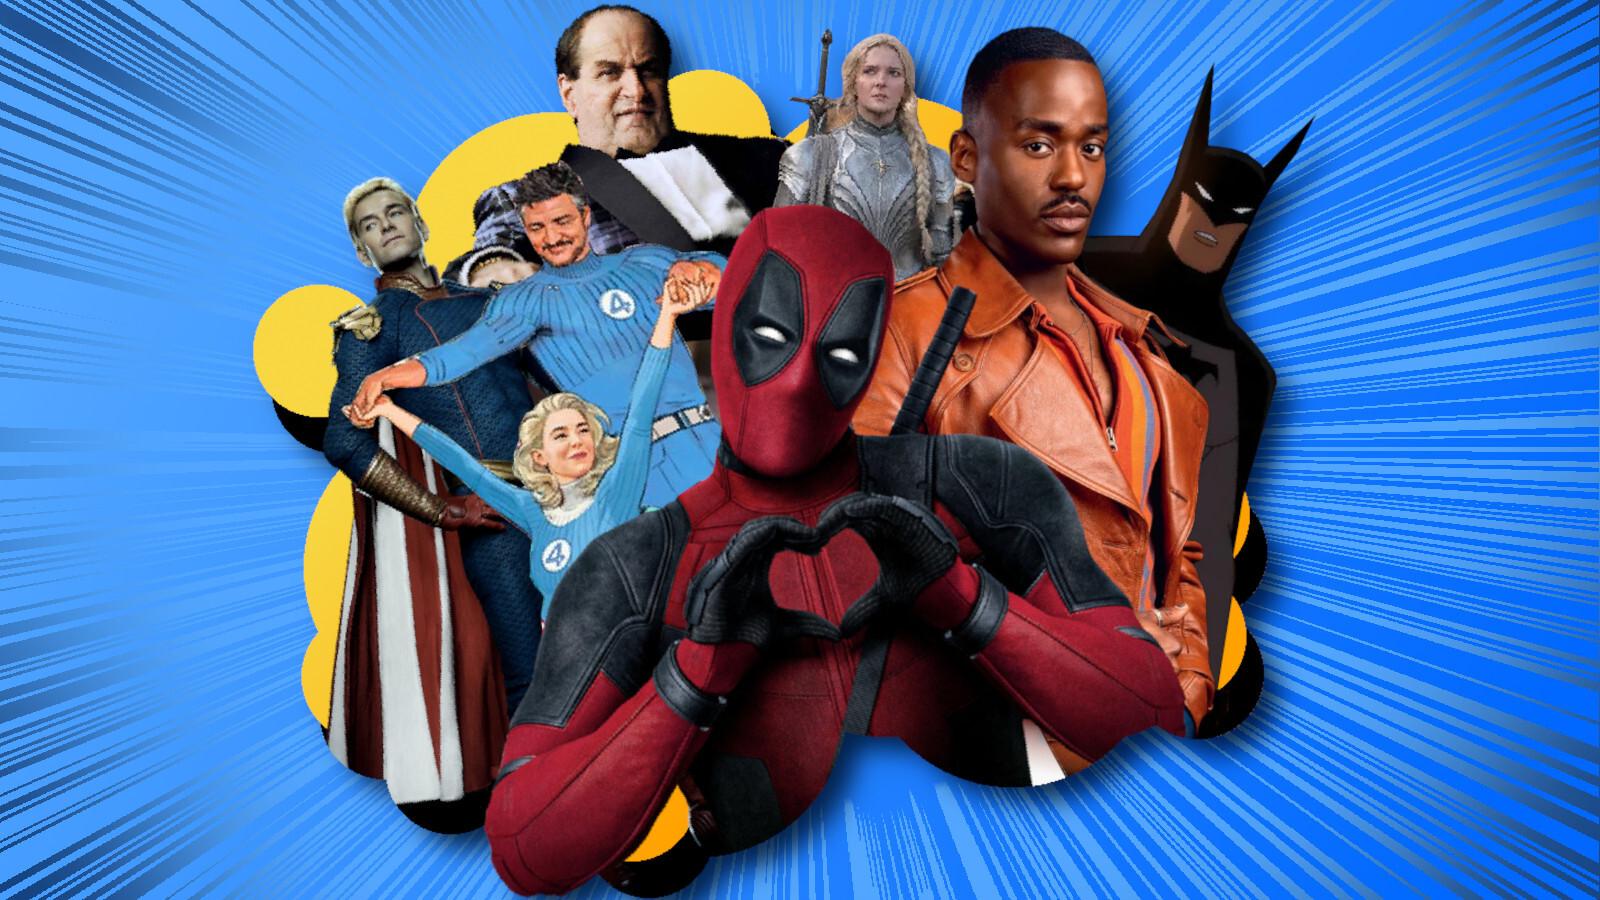 Deadpool, Doctor Who, Batman, Penguin, Homelander, and the Fantastic Four - all part of the SDCC schedule